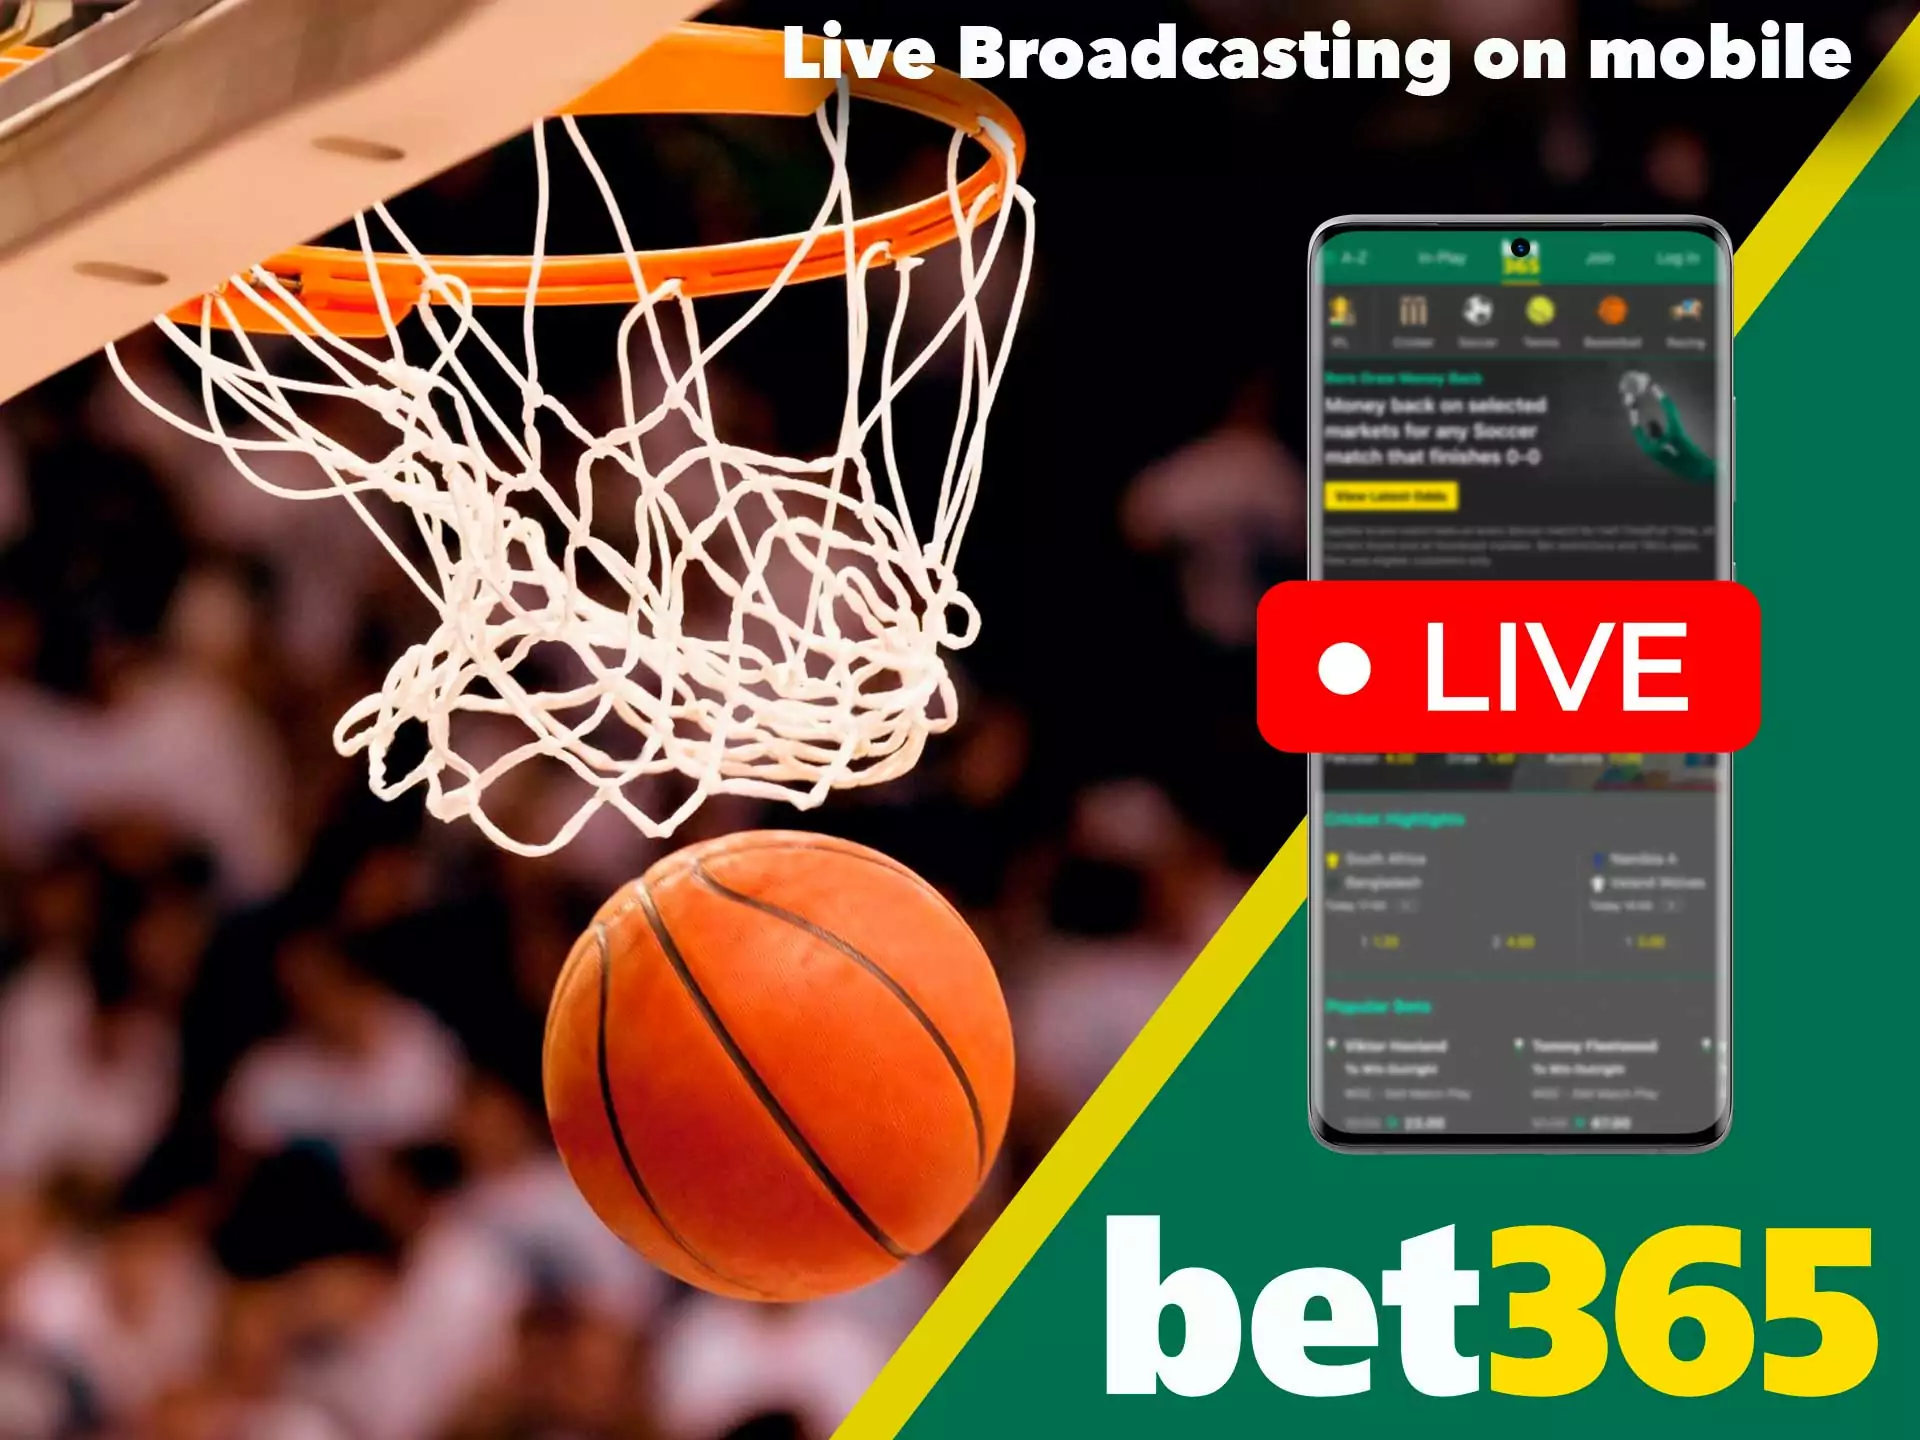 At Bet365 you can watch live broadcasts of matches online.